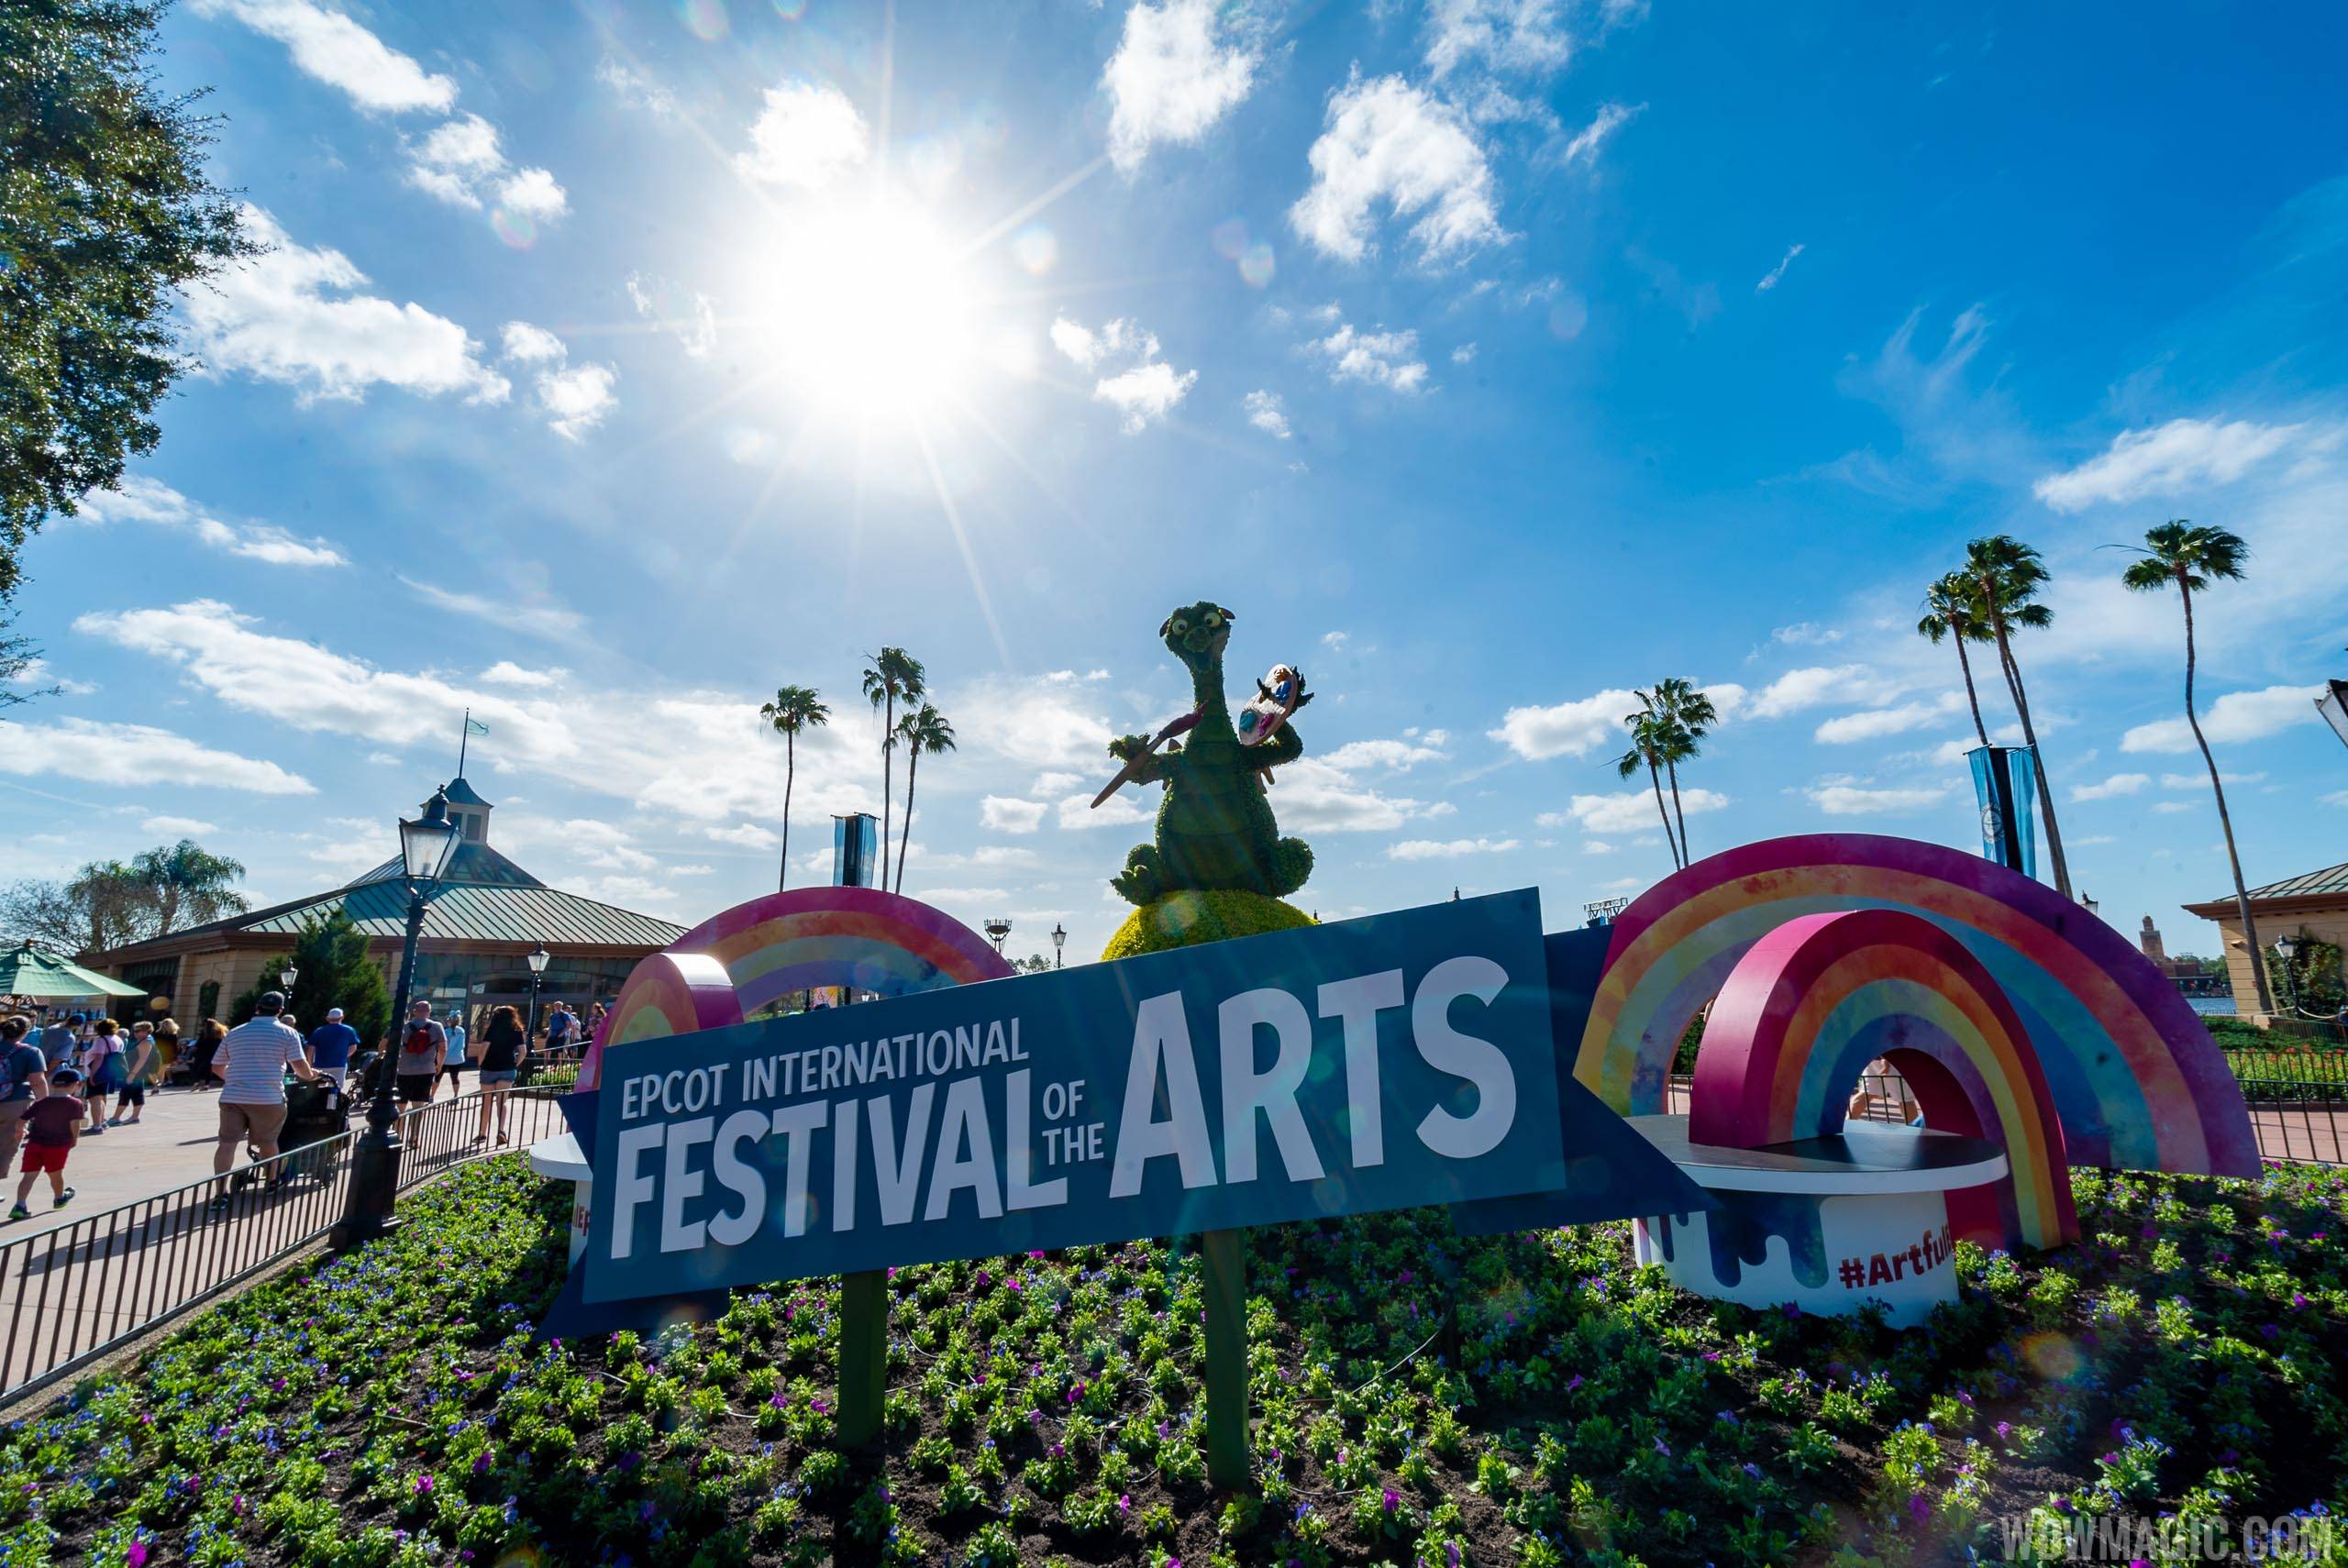 PHOTOS - What's new and changed at the 2020 Epcot International Festival of the Arts